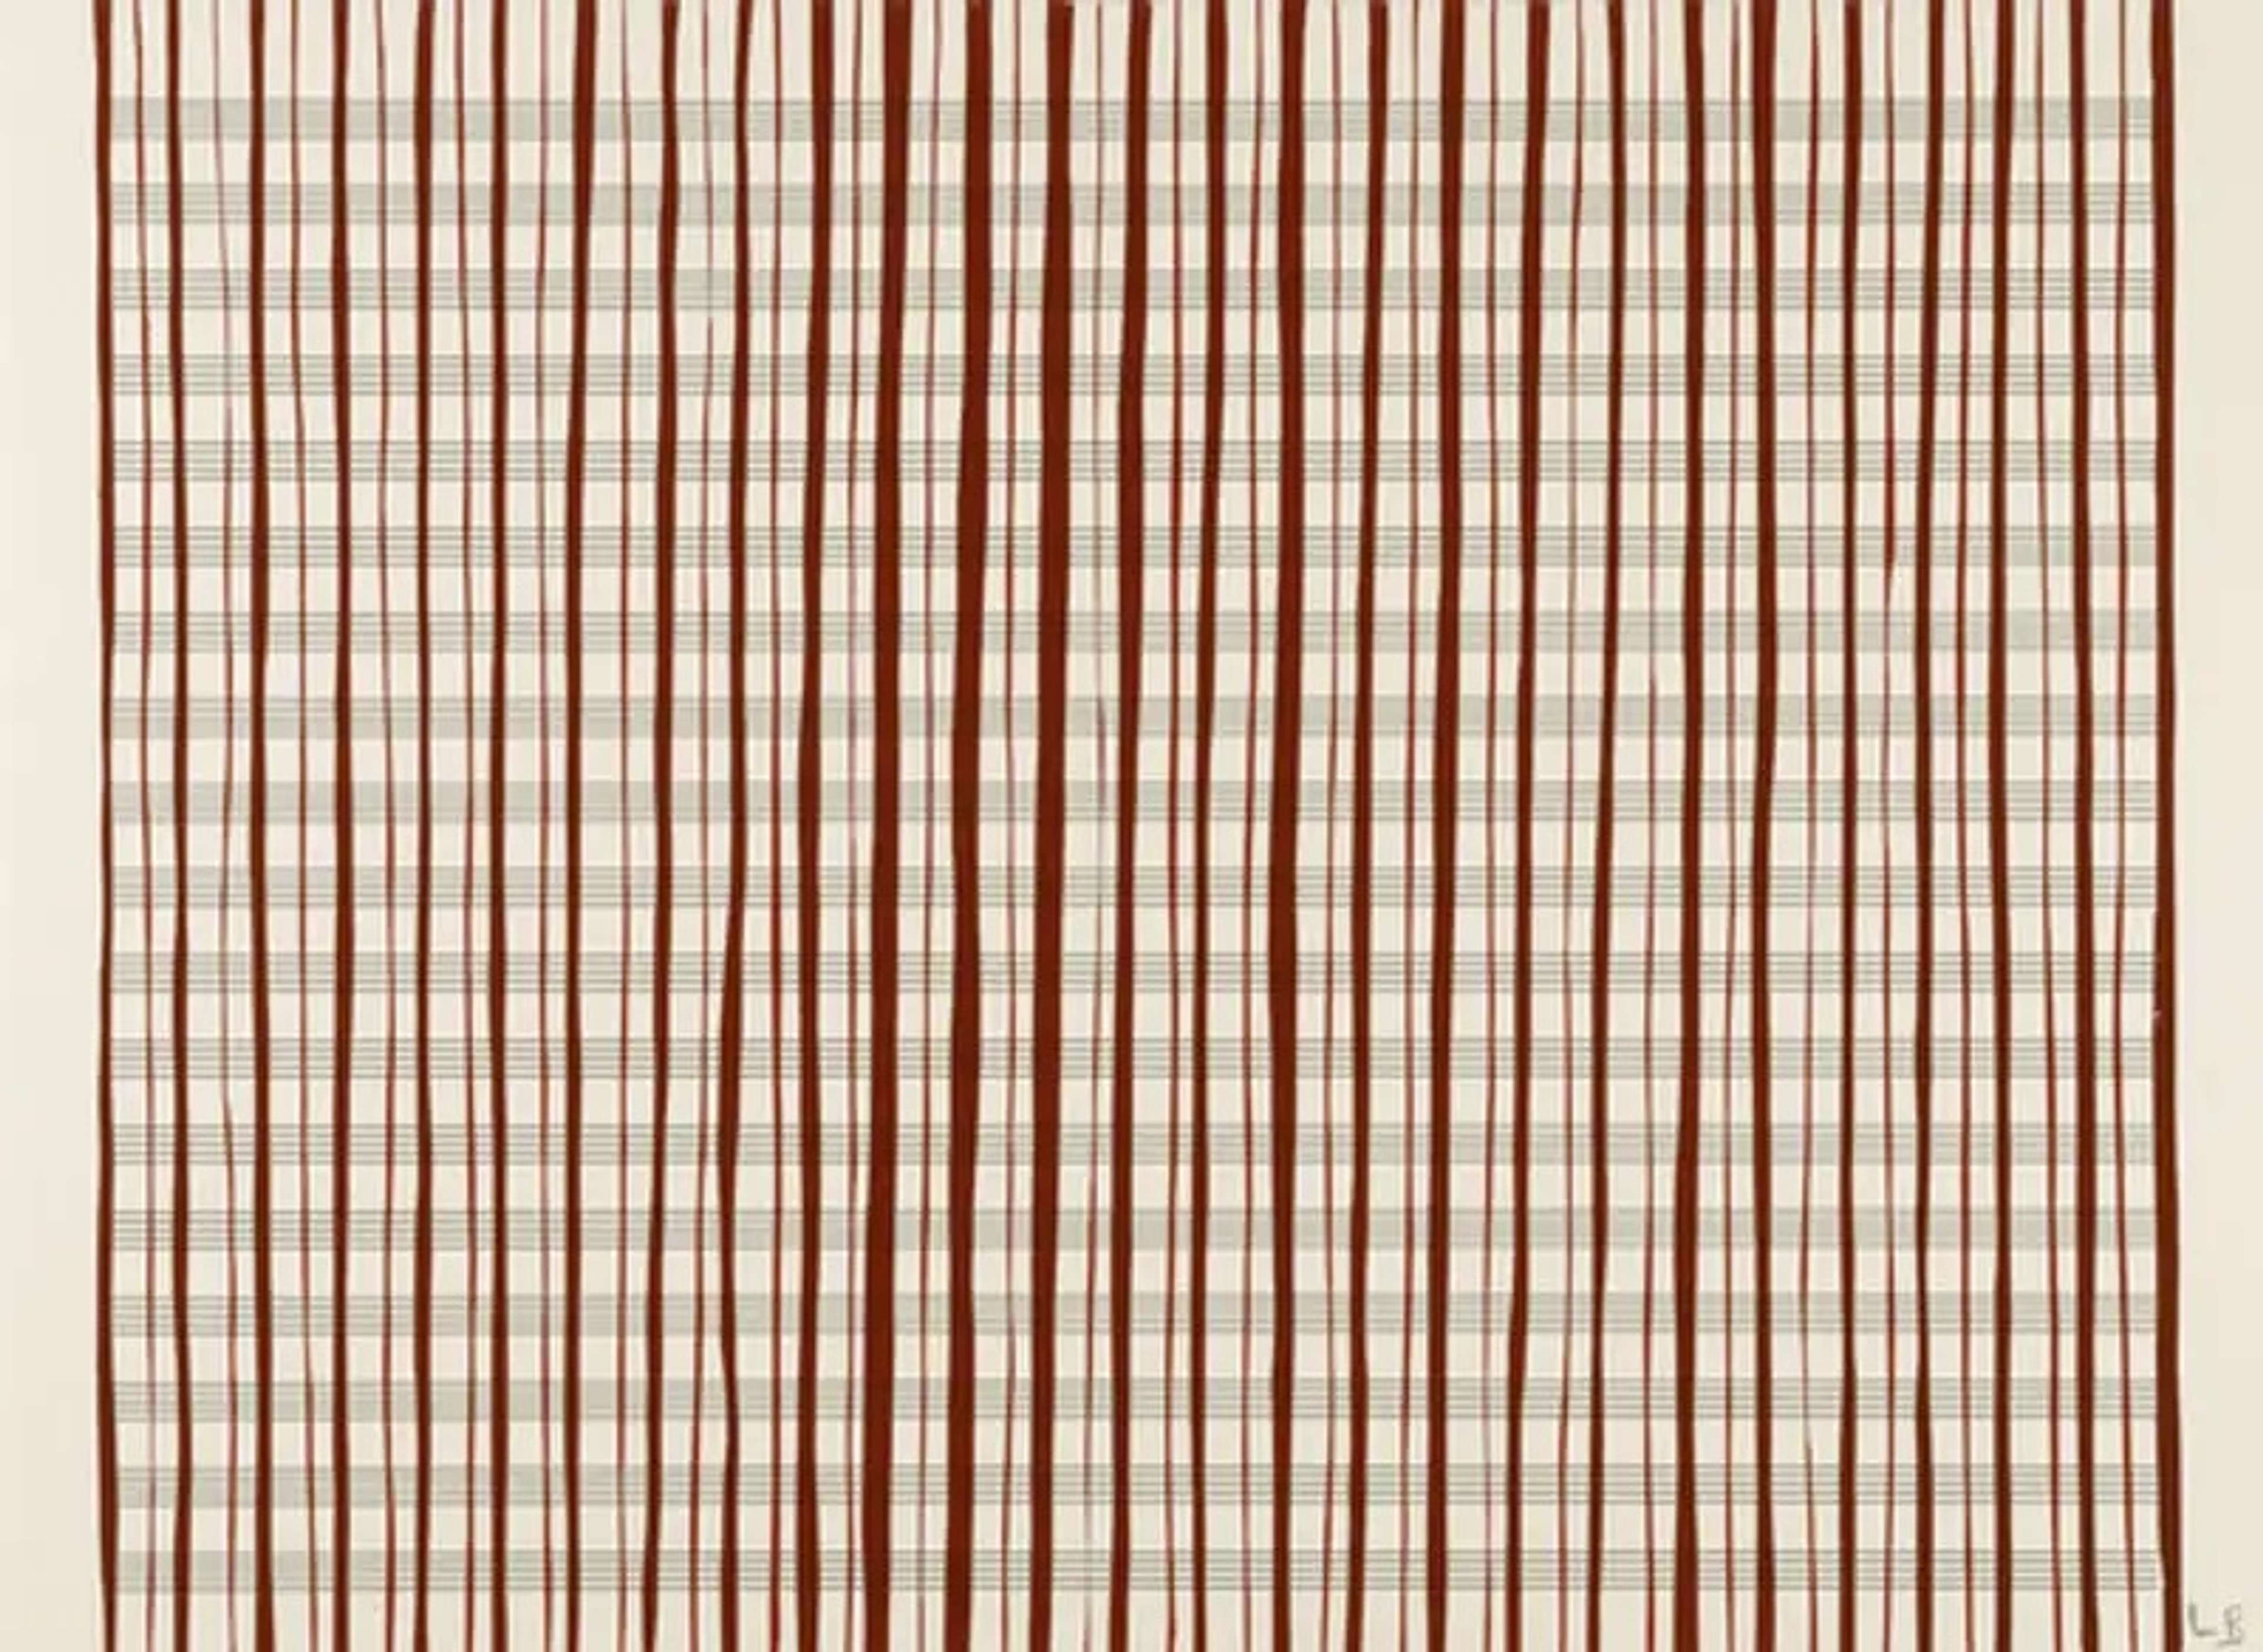 Louise Bourgeois’ Untitled #3. A screenprint of red vertical lines against a sheet of horizontal lines.